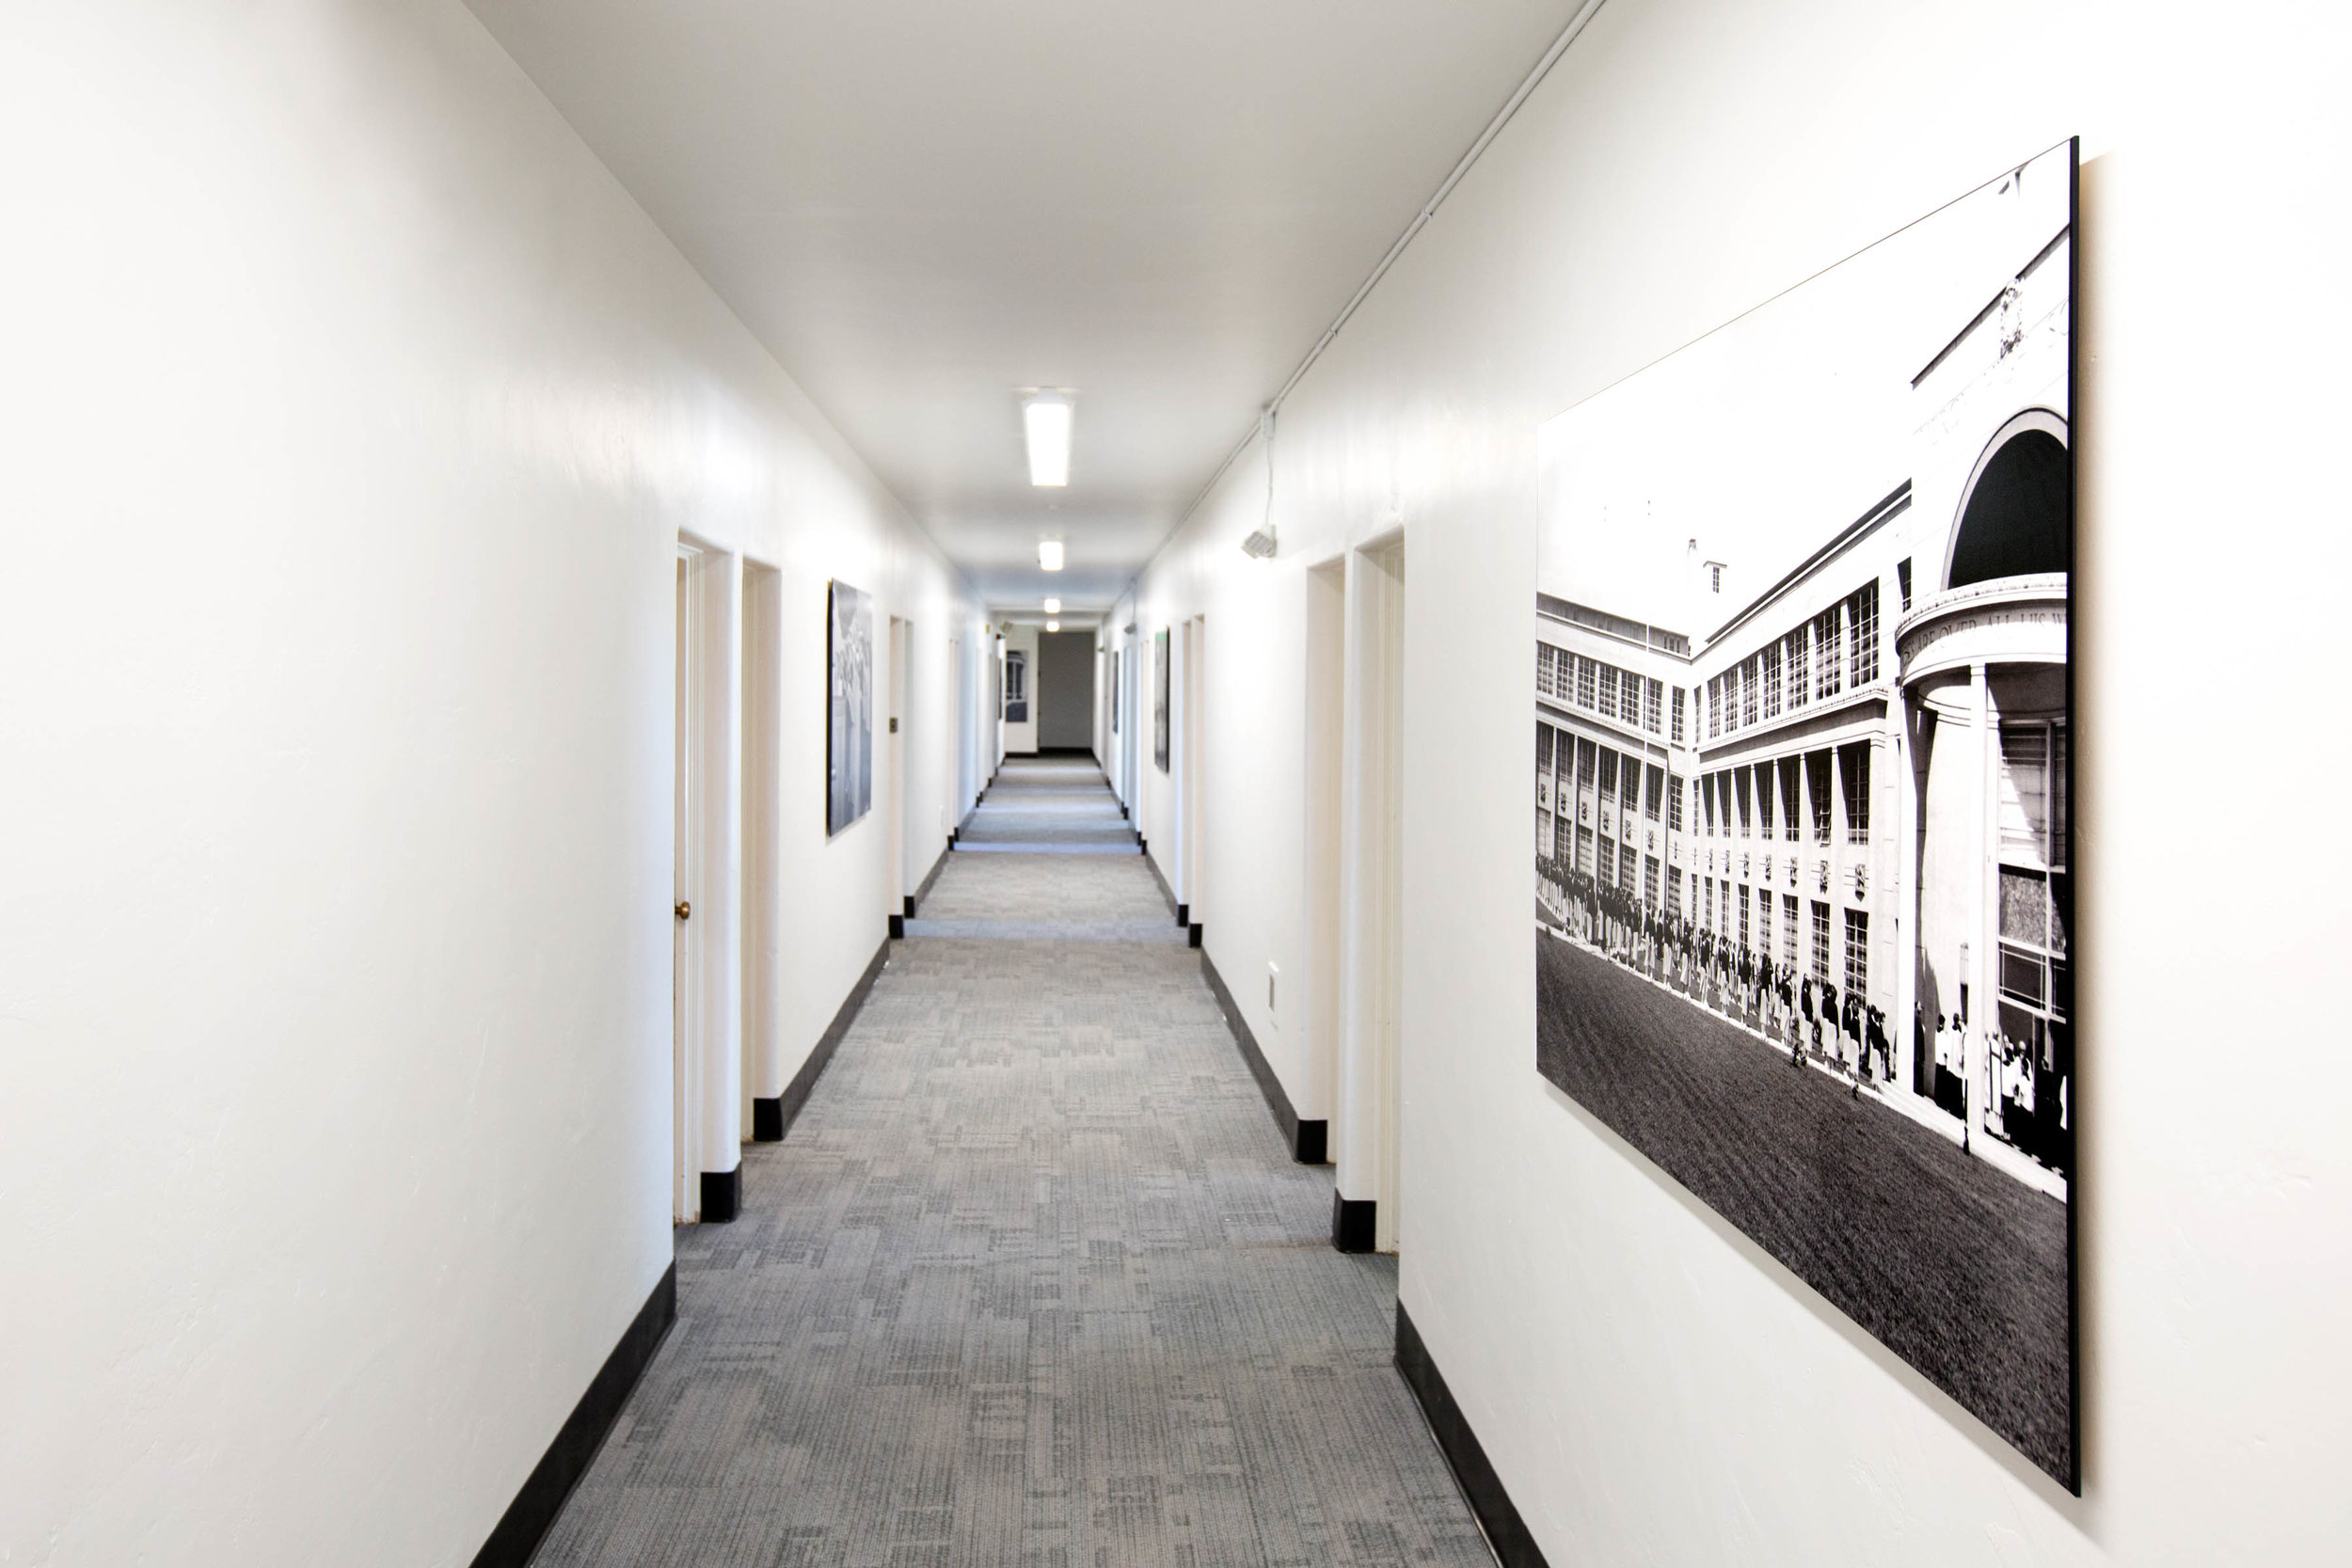 AFTER - ADMINISTRATIVE HALLWAY 